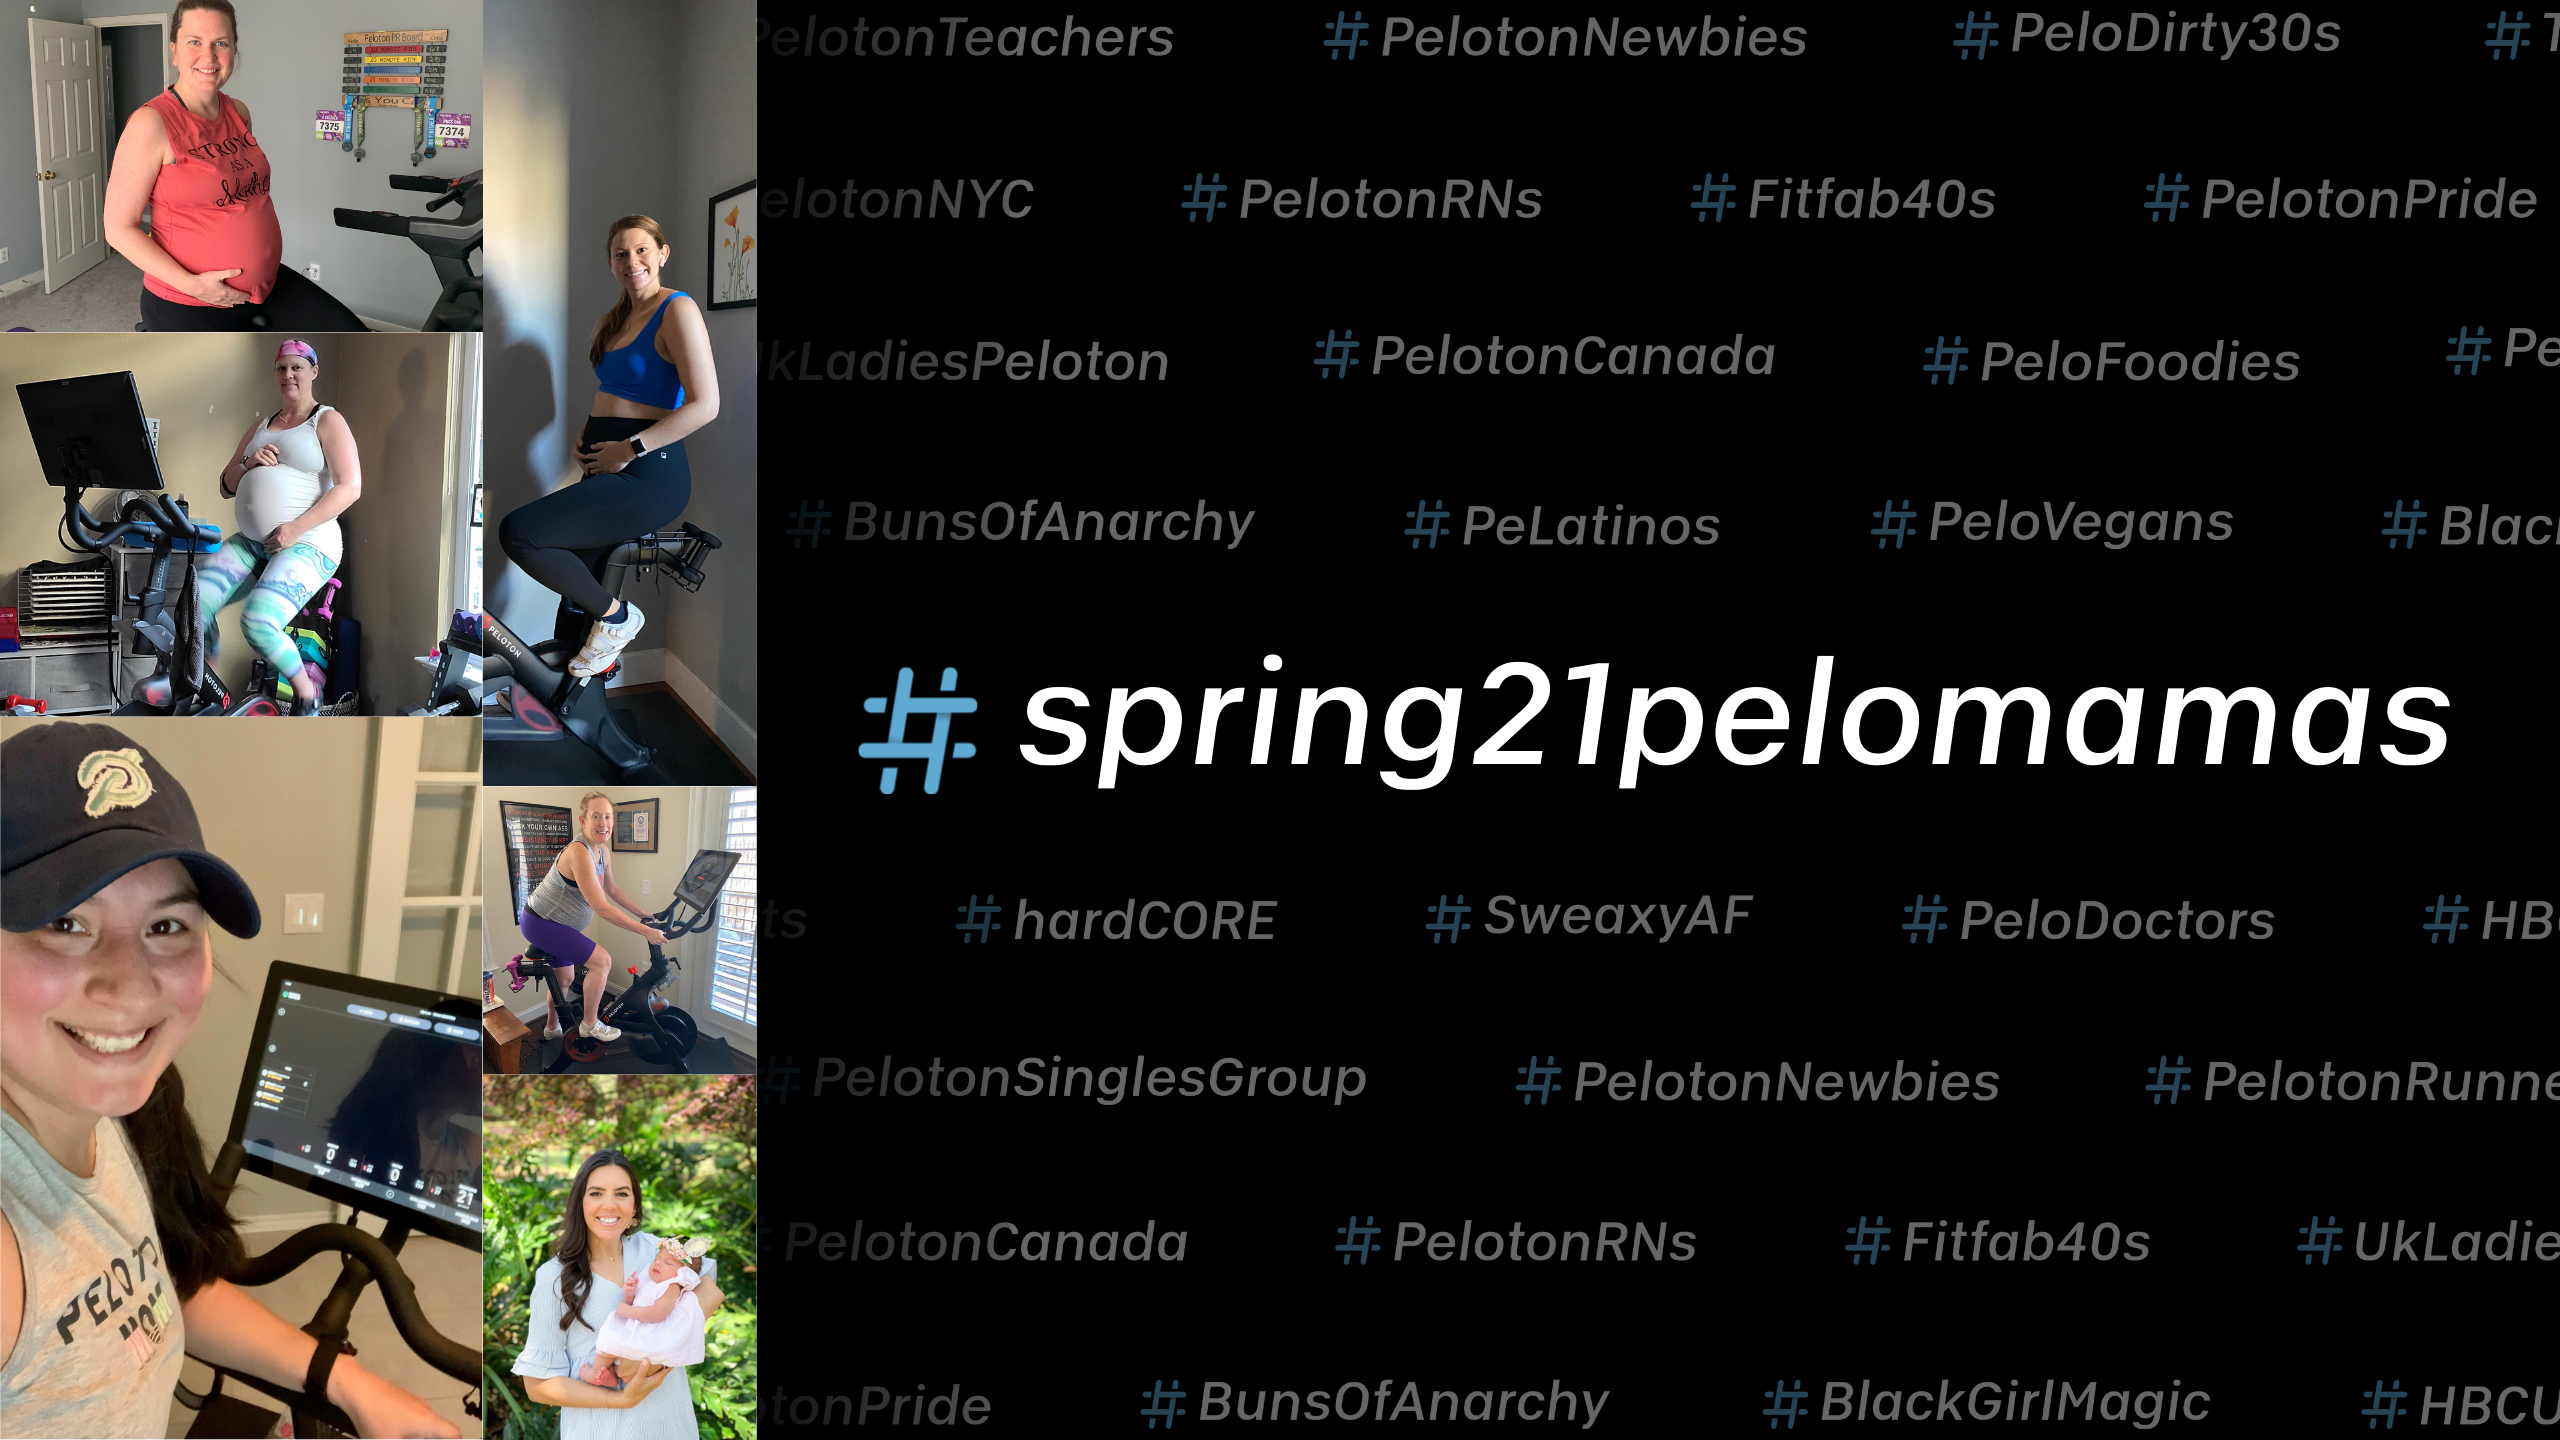 How the #Spring21Pelomamas Support Each Other Every Day